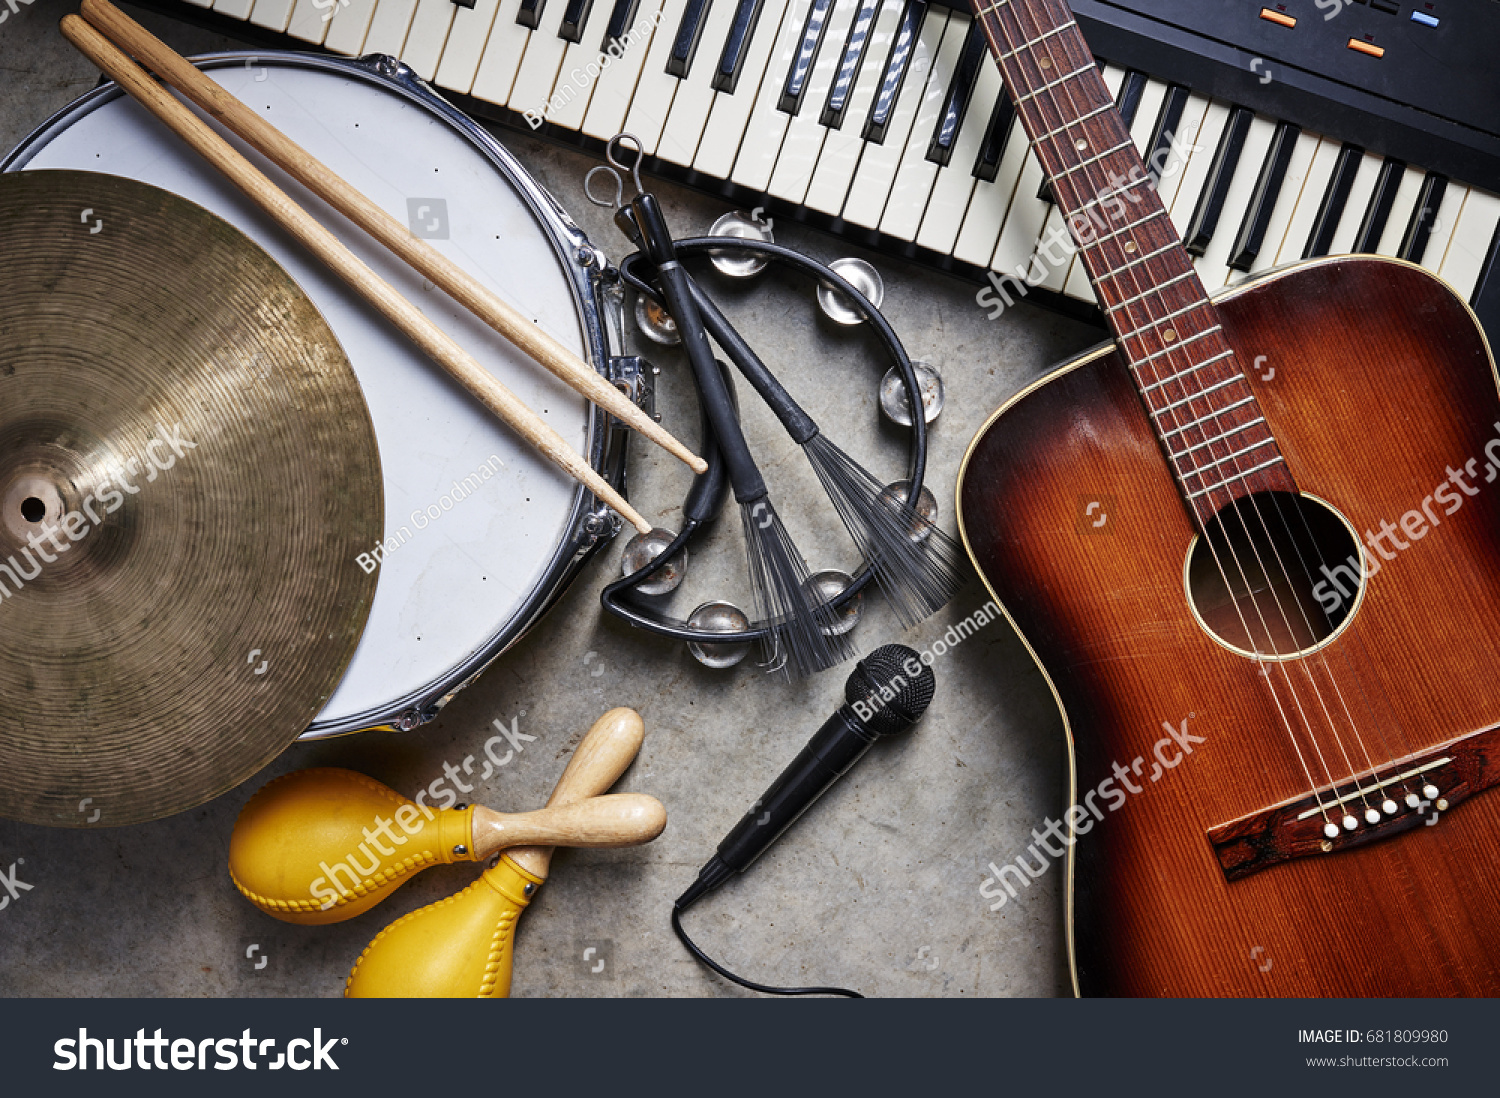 a group of musical instruments including a guitar, drum, keyboard, tambourine. #681809980